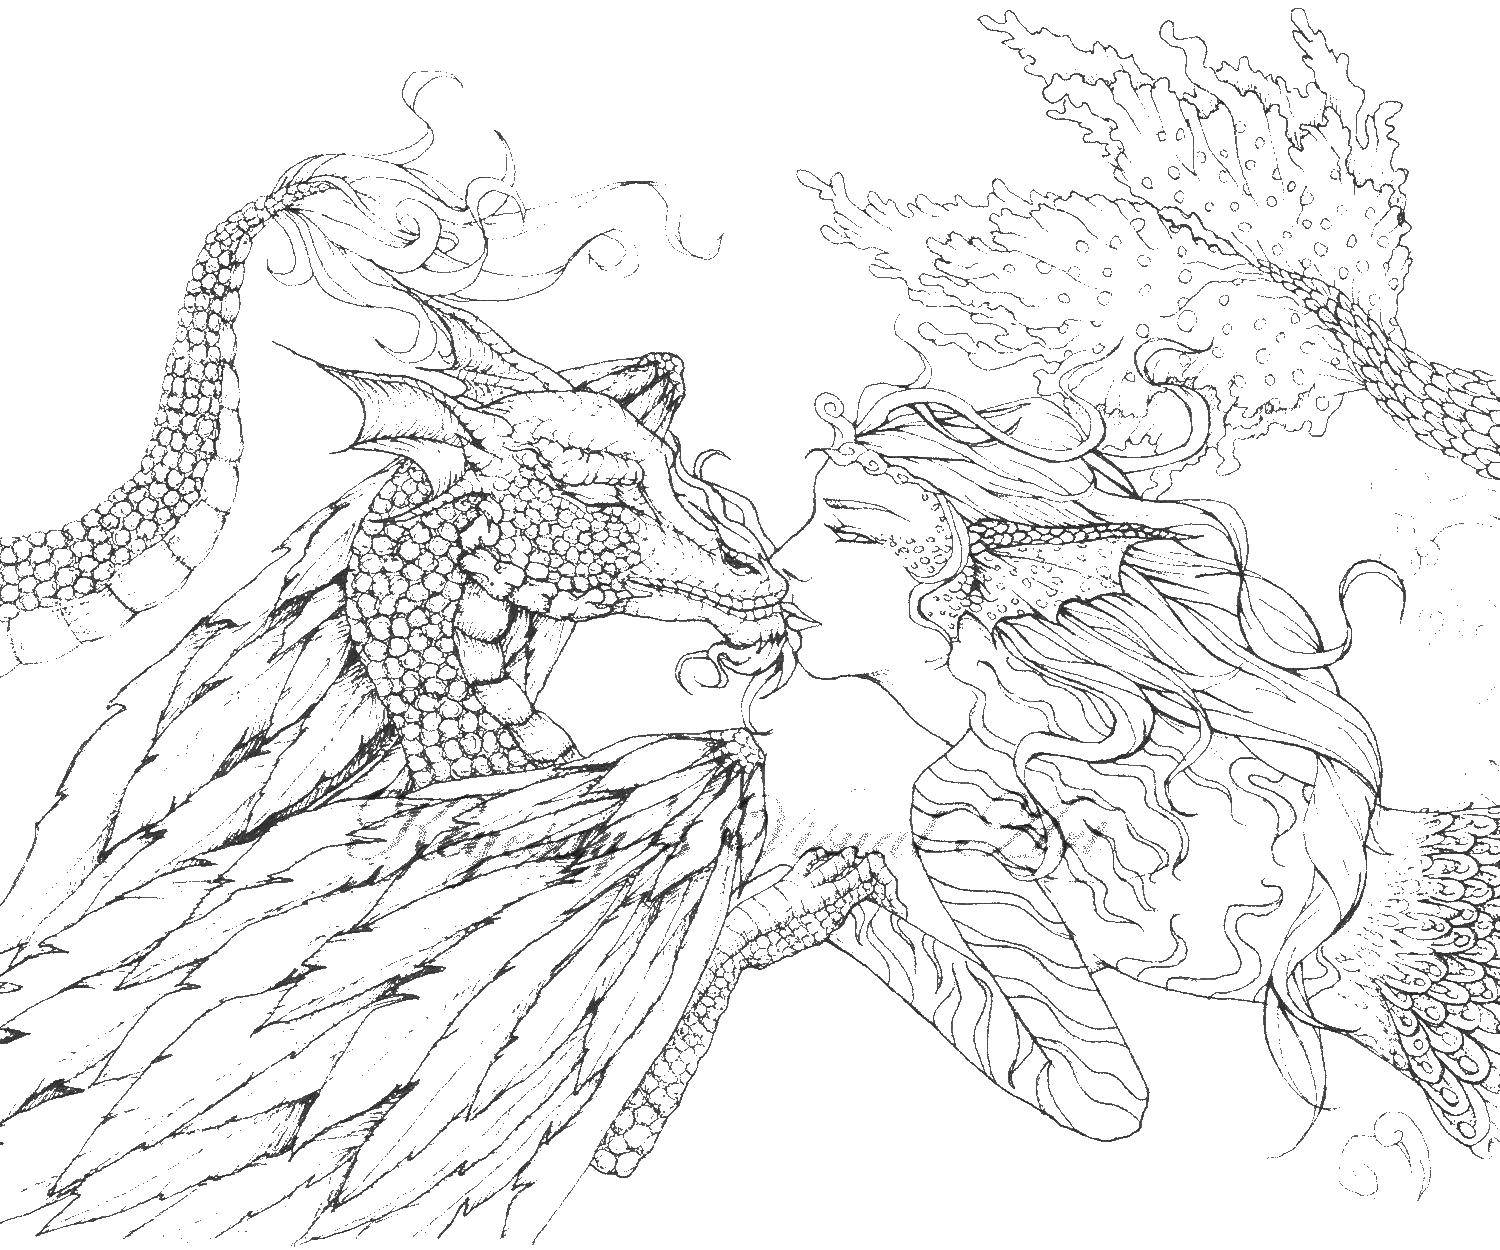 Coloring Dragon and mermaid. Category For teenagers. Tags:  dragons, mermaid.